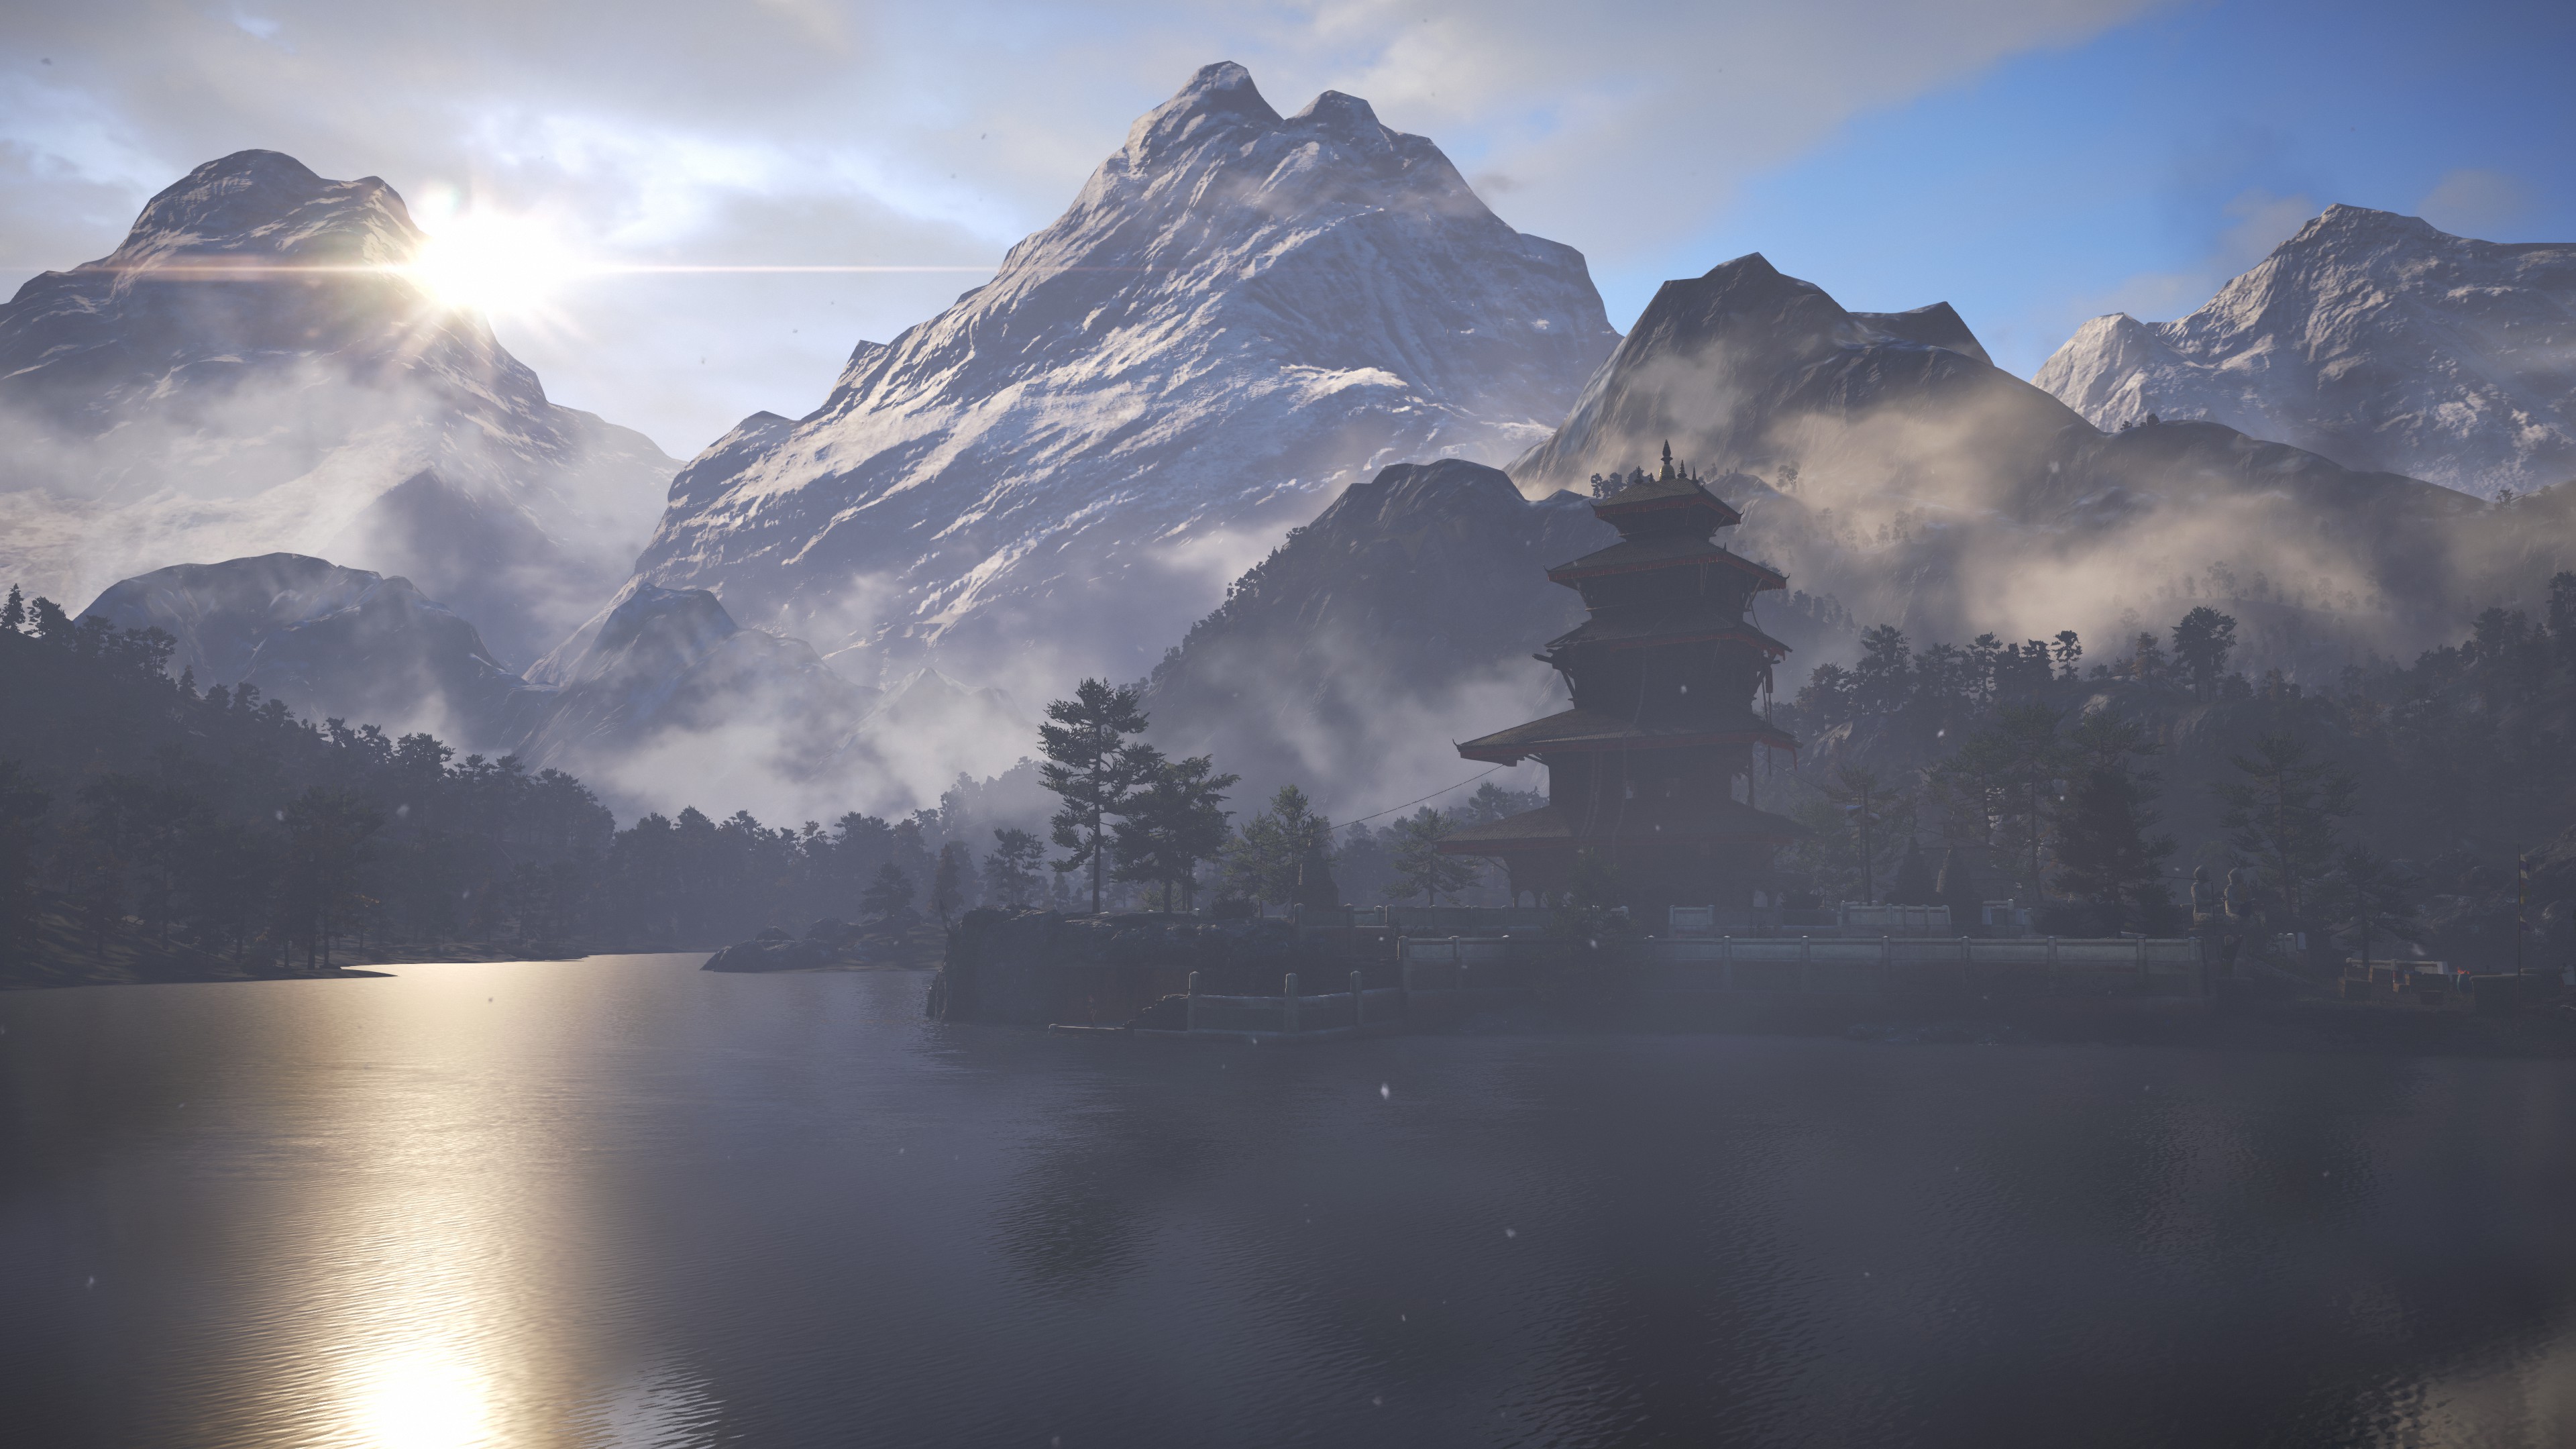  Far Cry 4 Windows Backgrounds